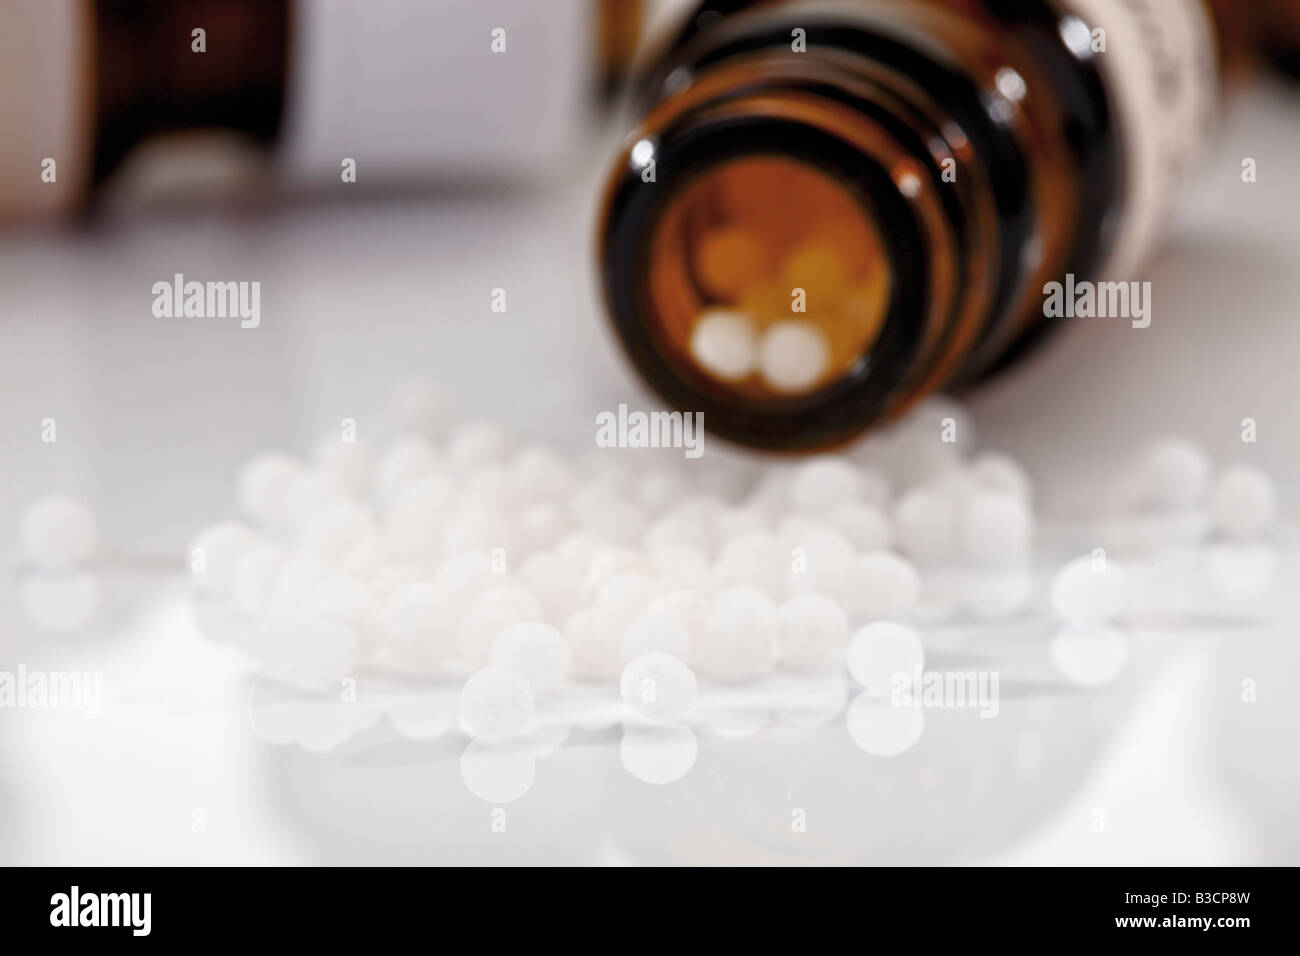 Flasks with pills Stock Photo